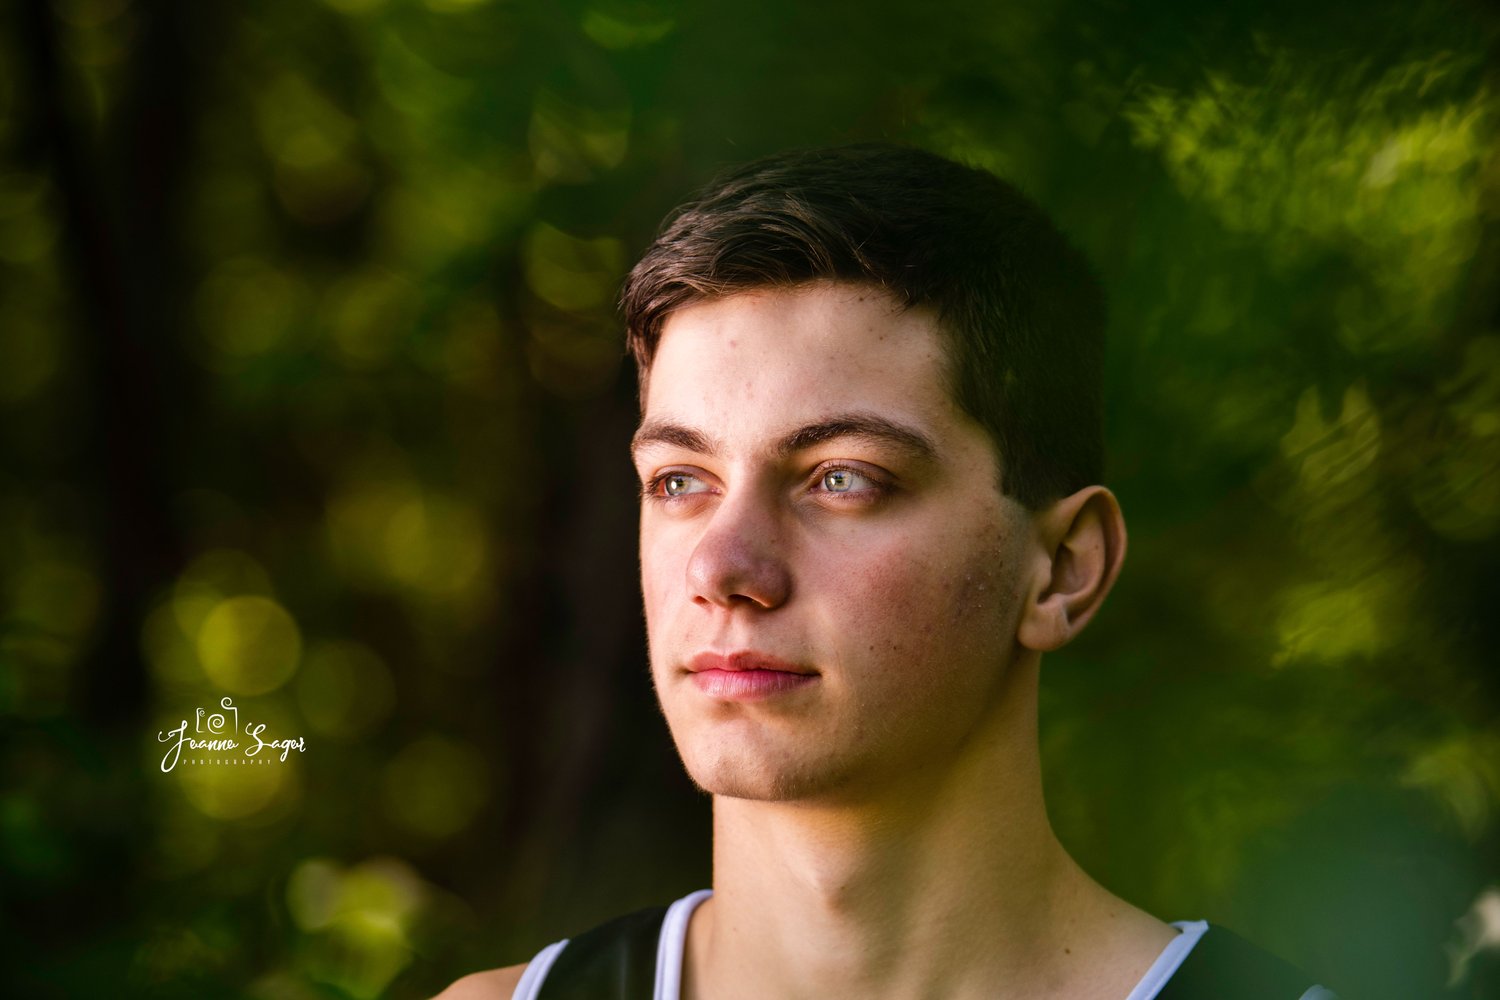 A high school senior looks off into the distance during a photo shoot